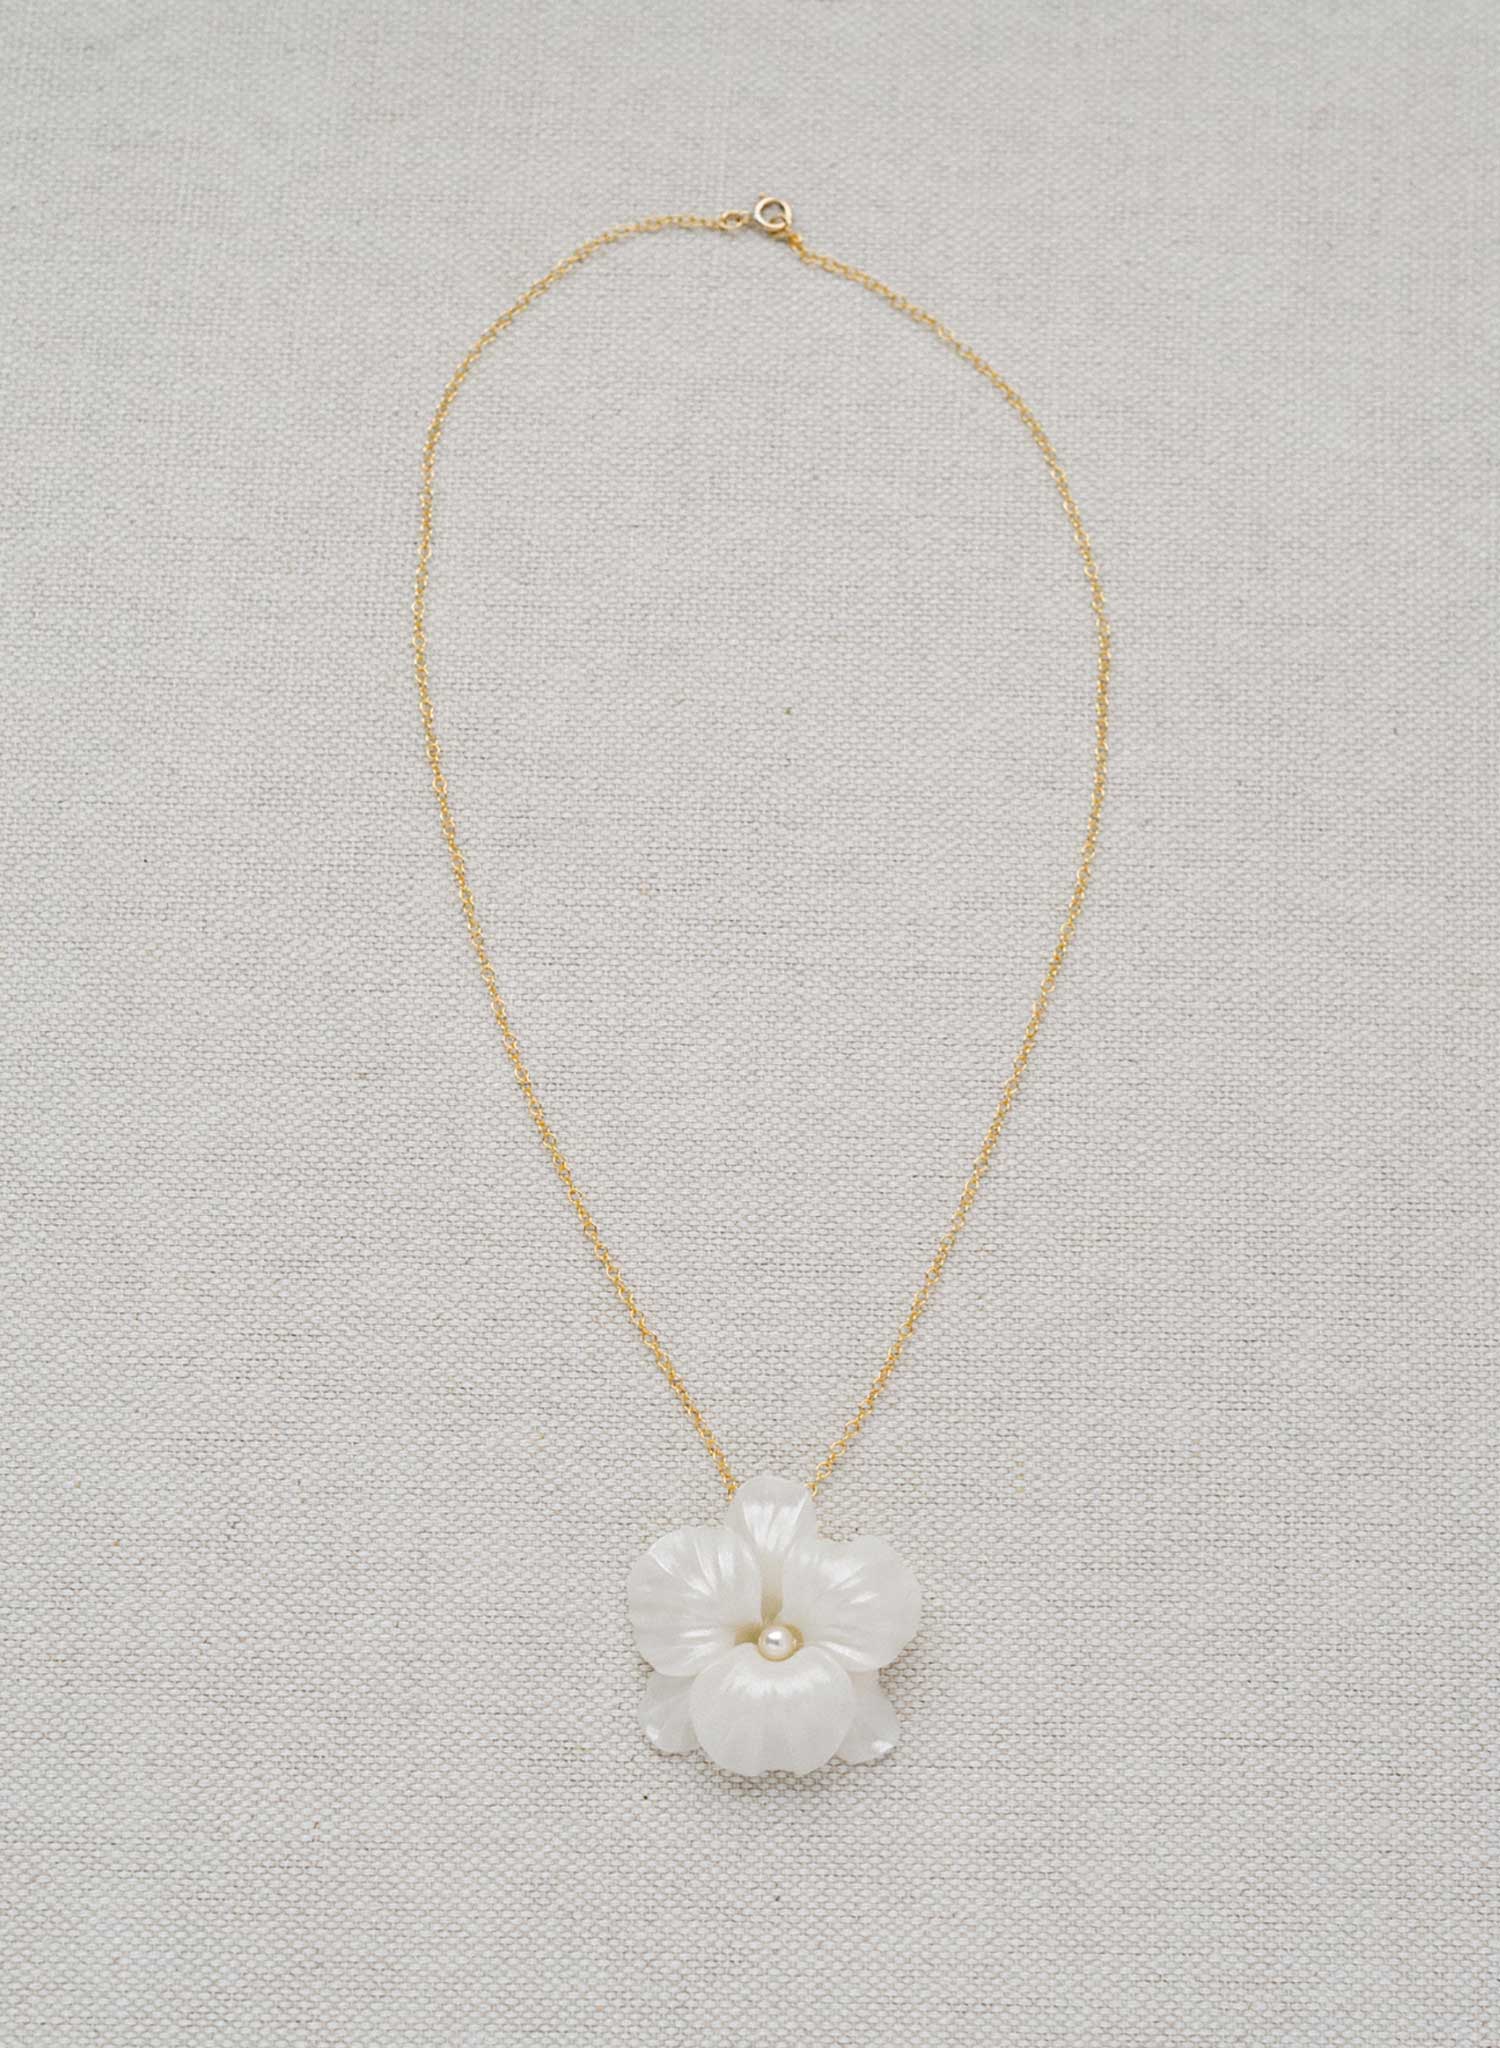 Simple orchid bridal necklace - Style #2420